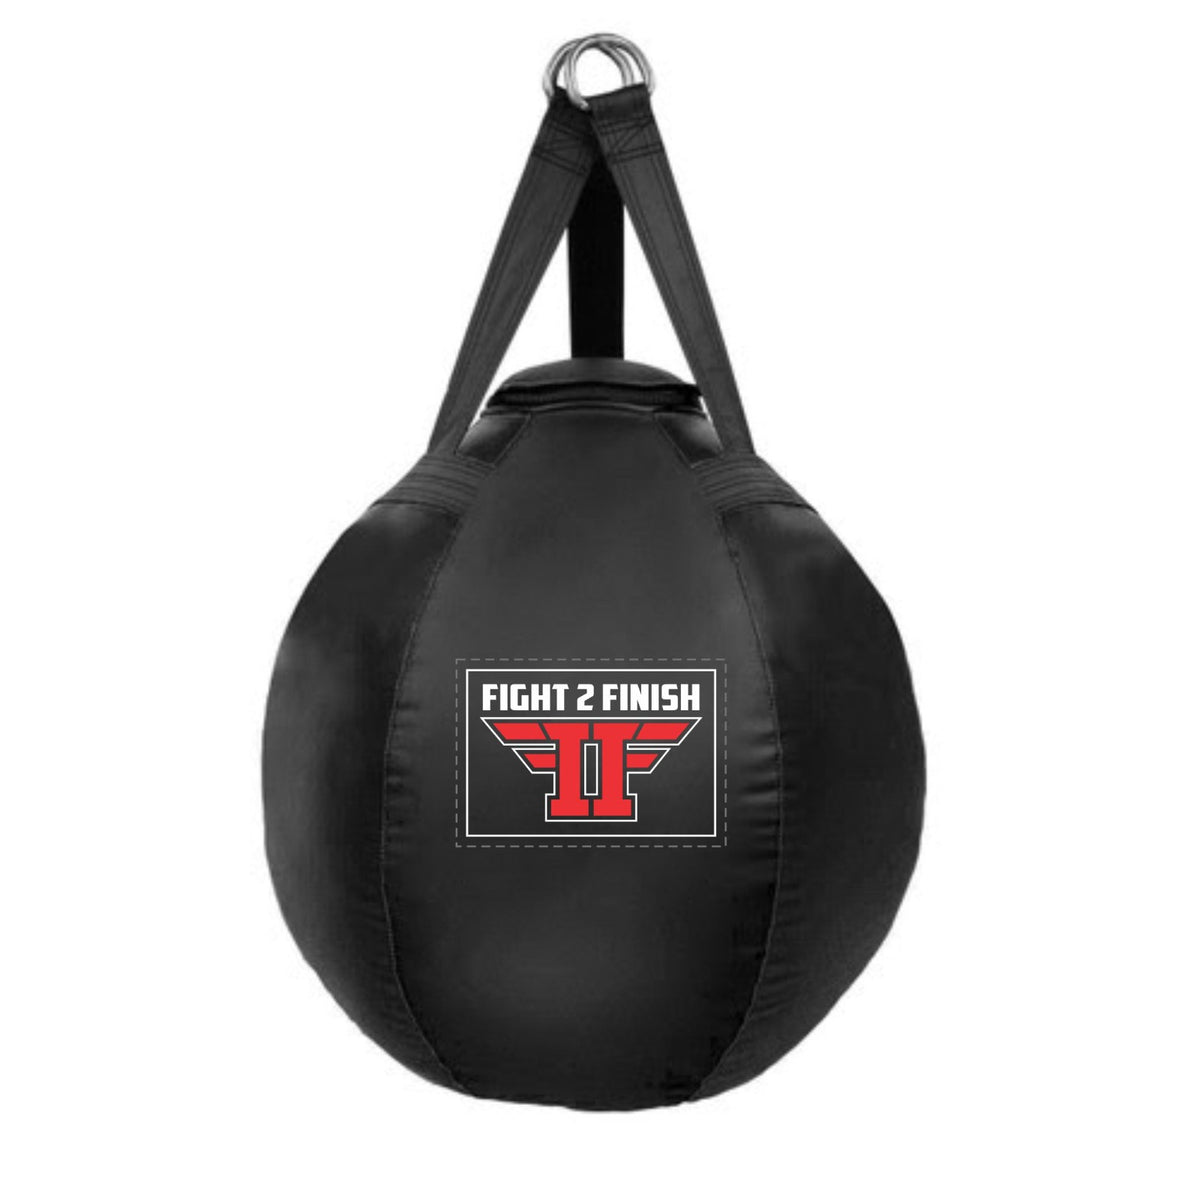 F2F Wrecking Ball Heavy Punching Bag MADE IN USA